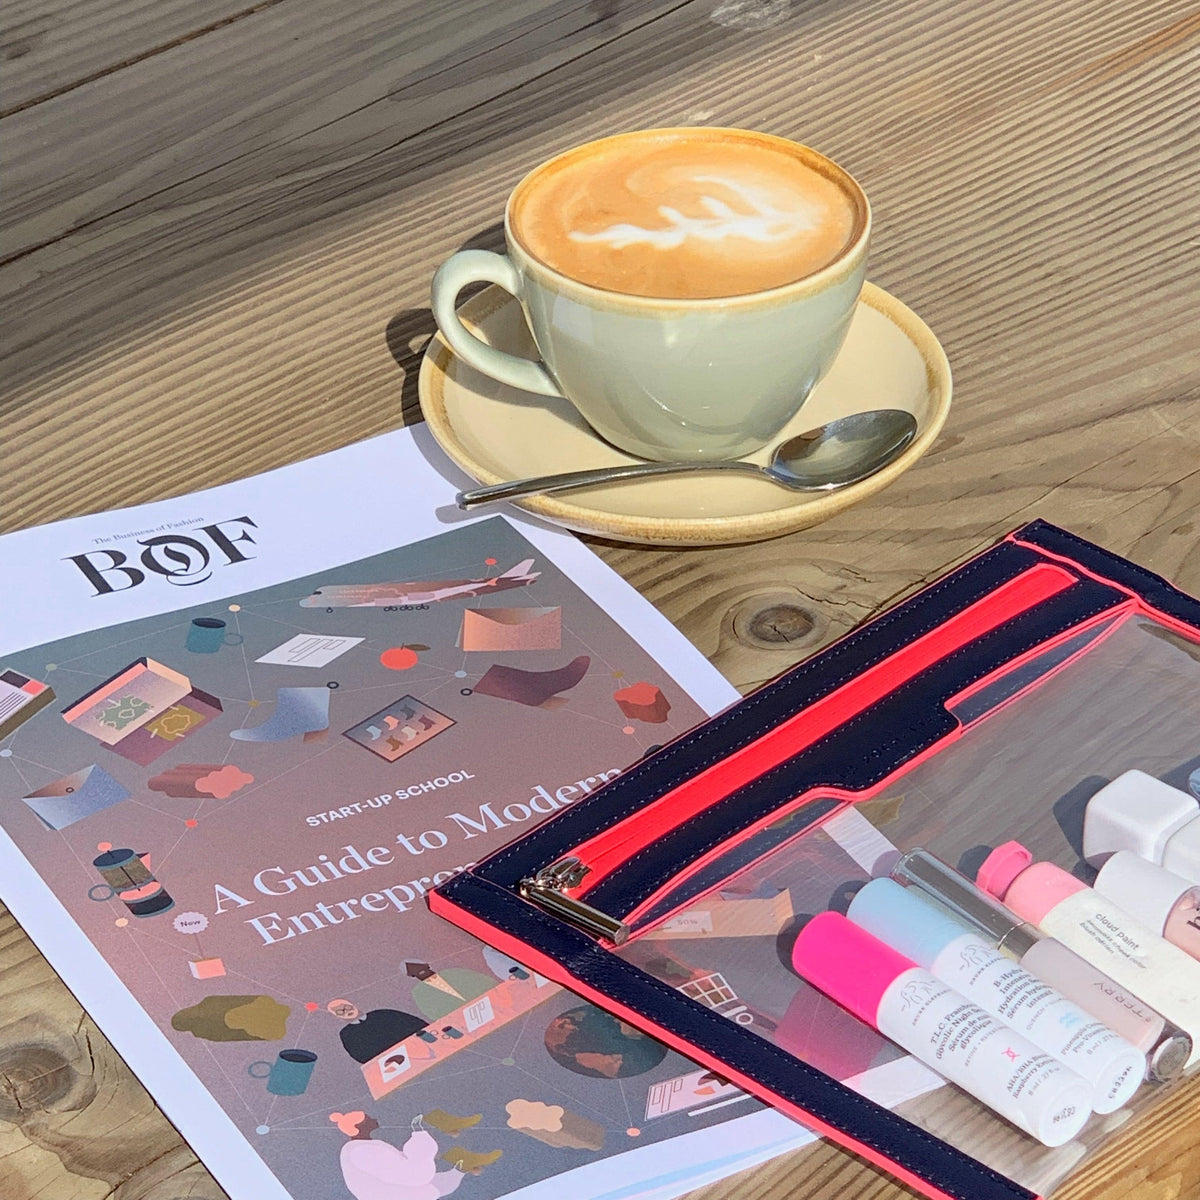 Anywhere Everywhere Wallet in Midnight Noen Pink colourway containing beauty accessories ontop of fashion magazine, next to a coffee